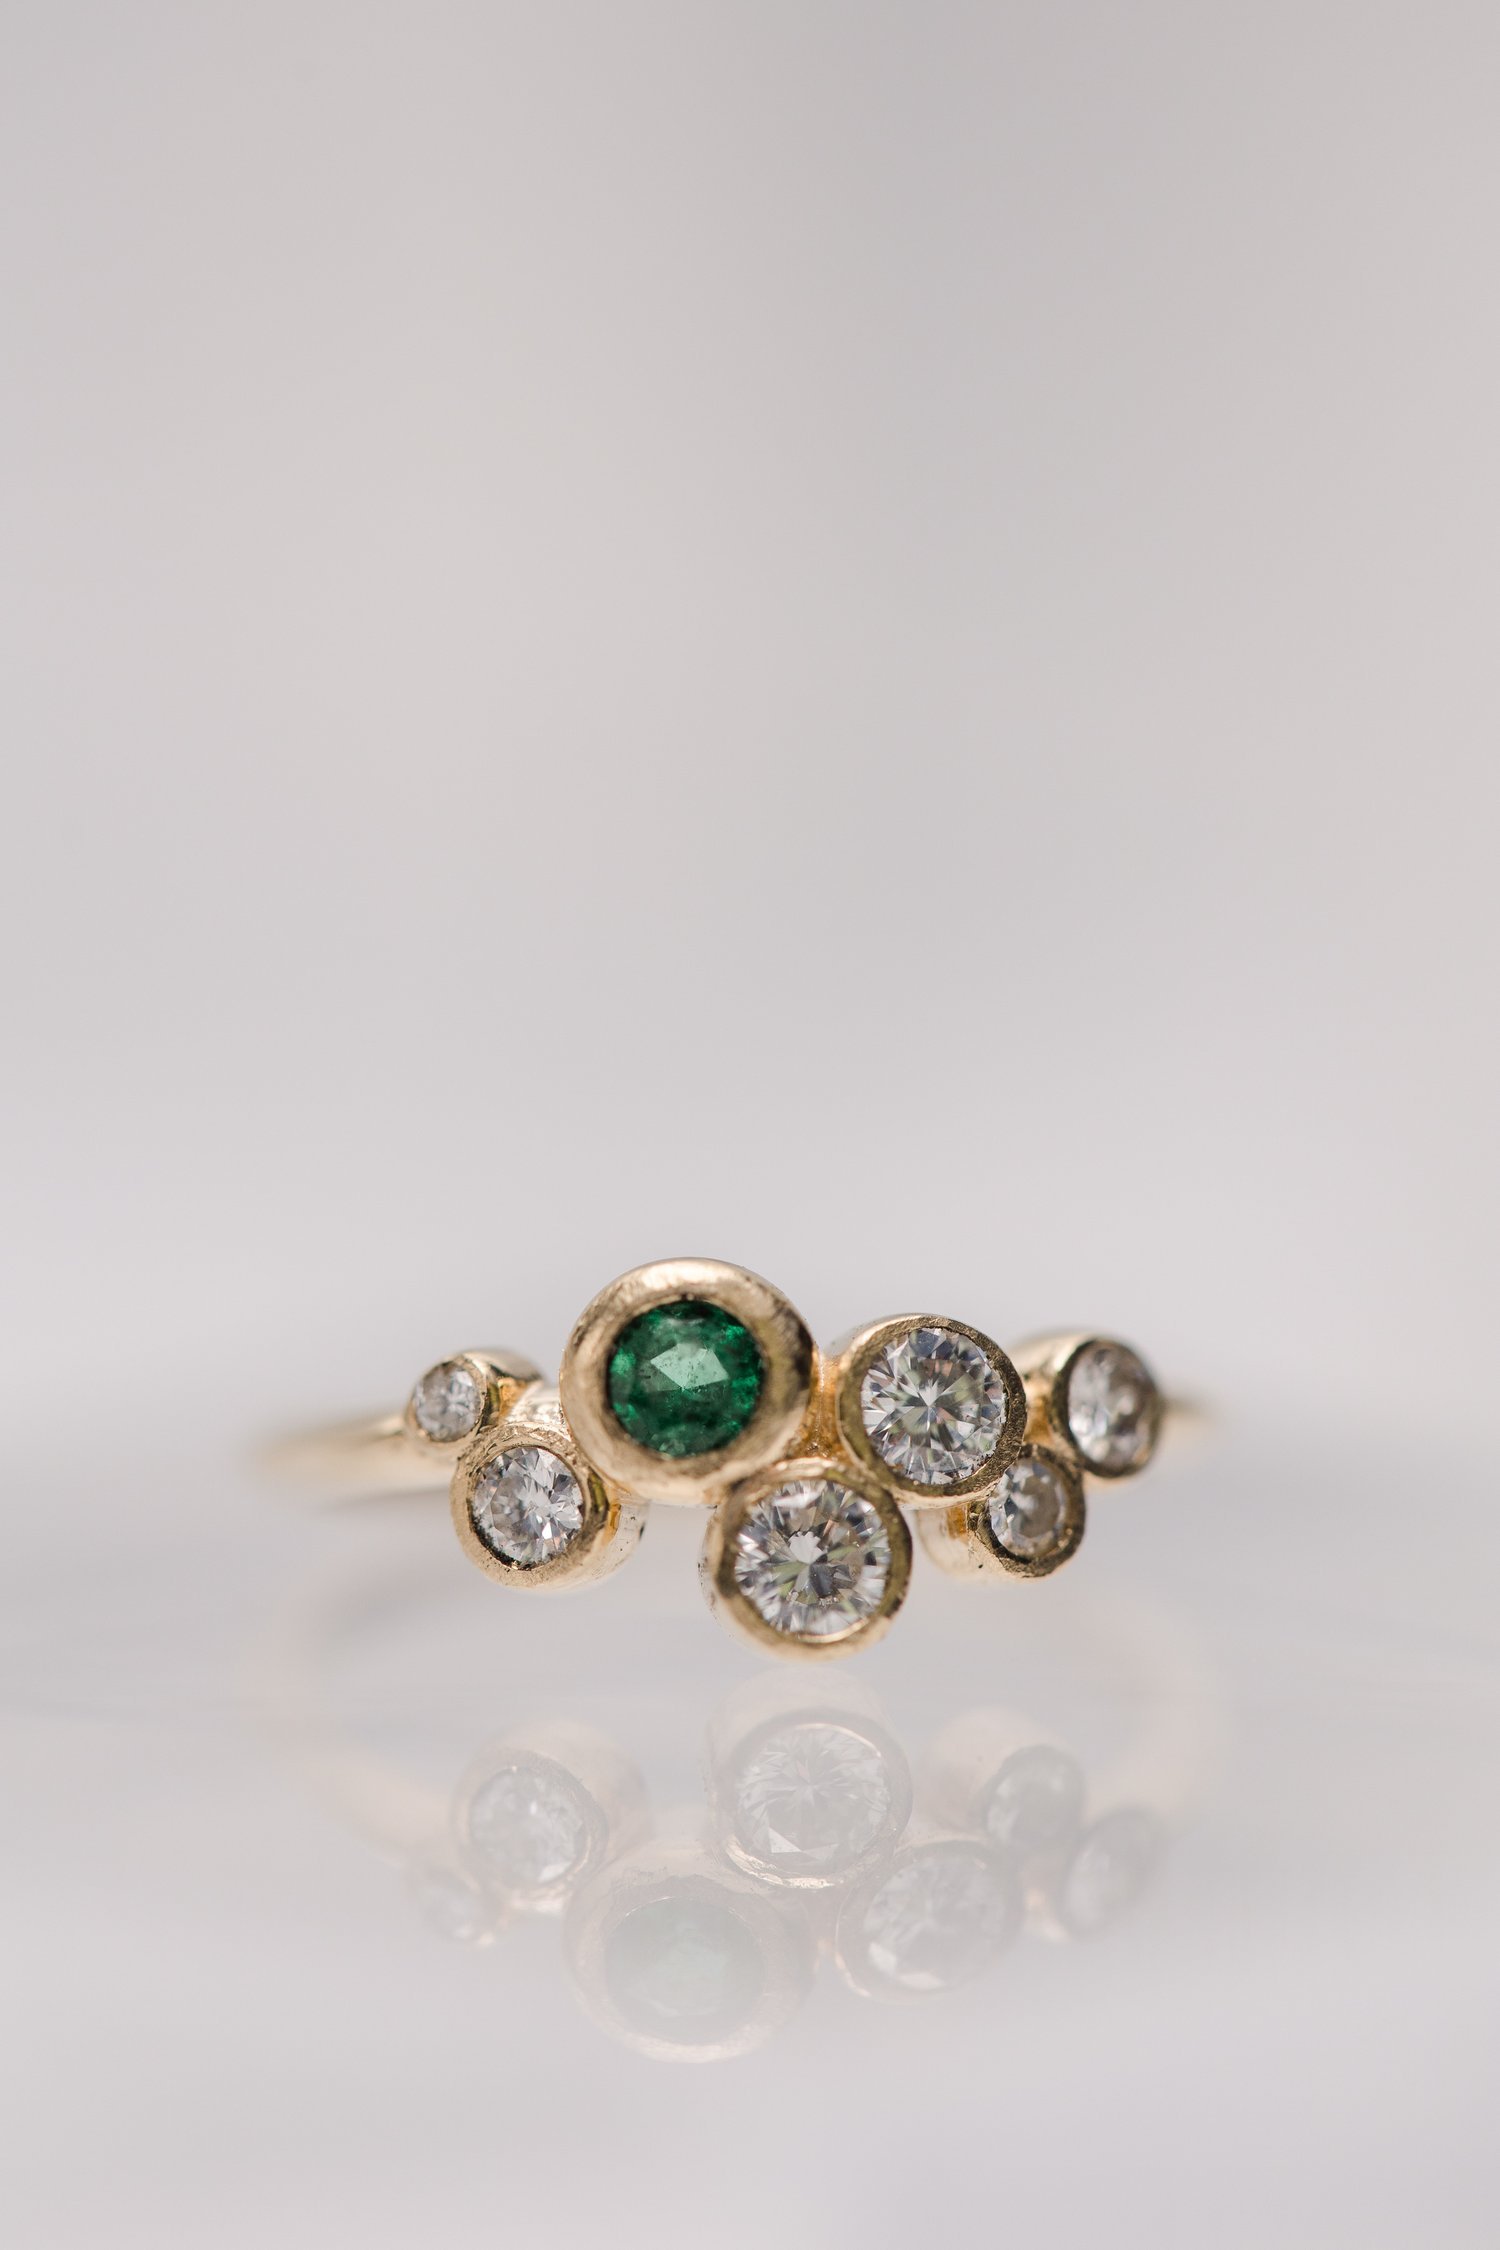 custom made bezel set yellow gold cluster style ring with diamonds and emeralds designed by Alexandria &amp; Company fine jewelers